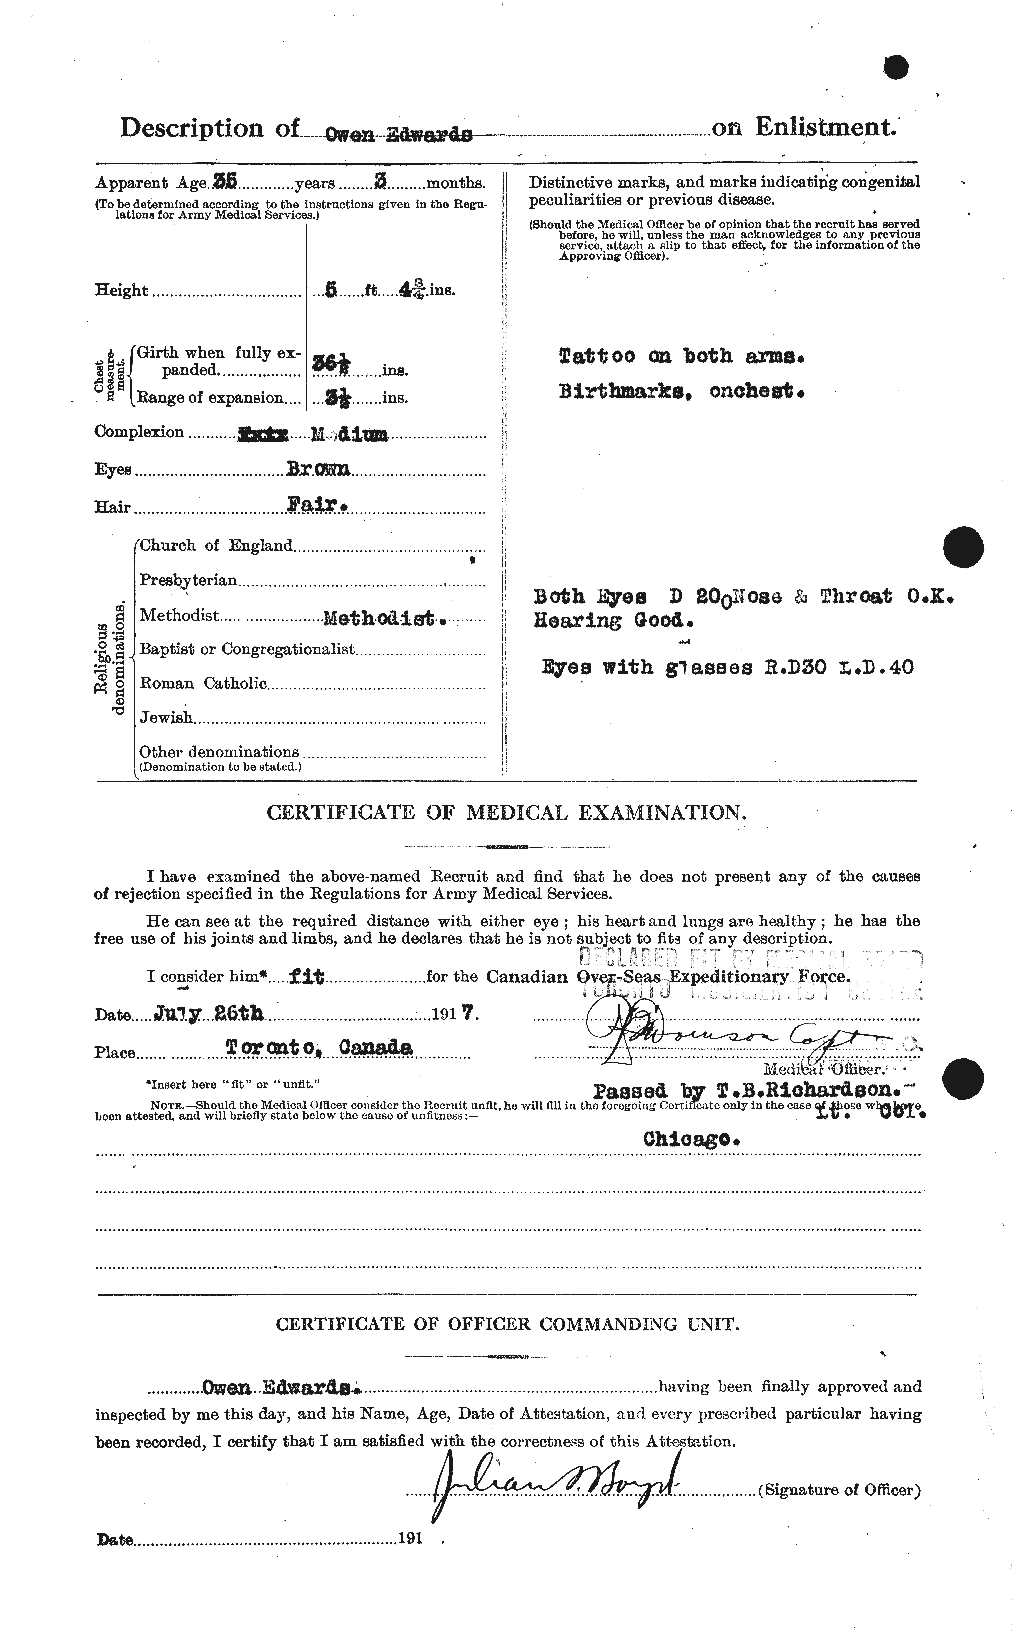 Personnel Records of the First World War - CEF 310228b